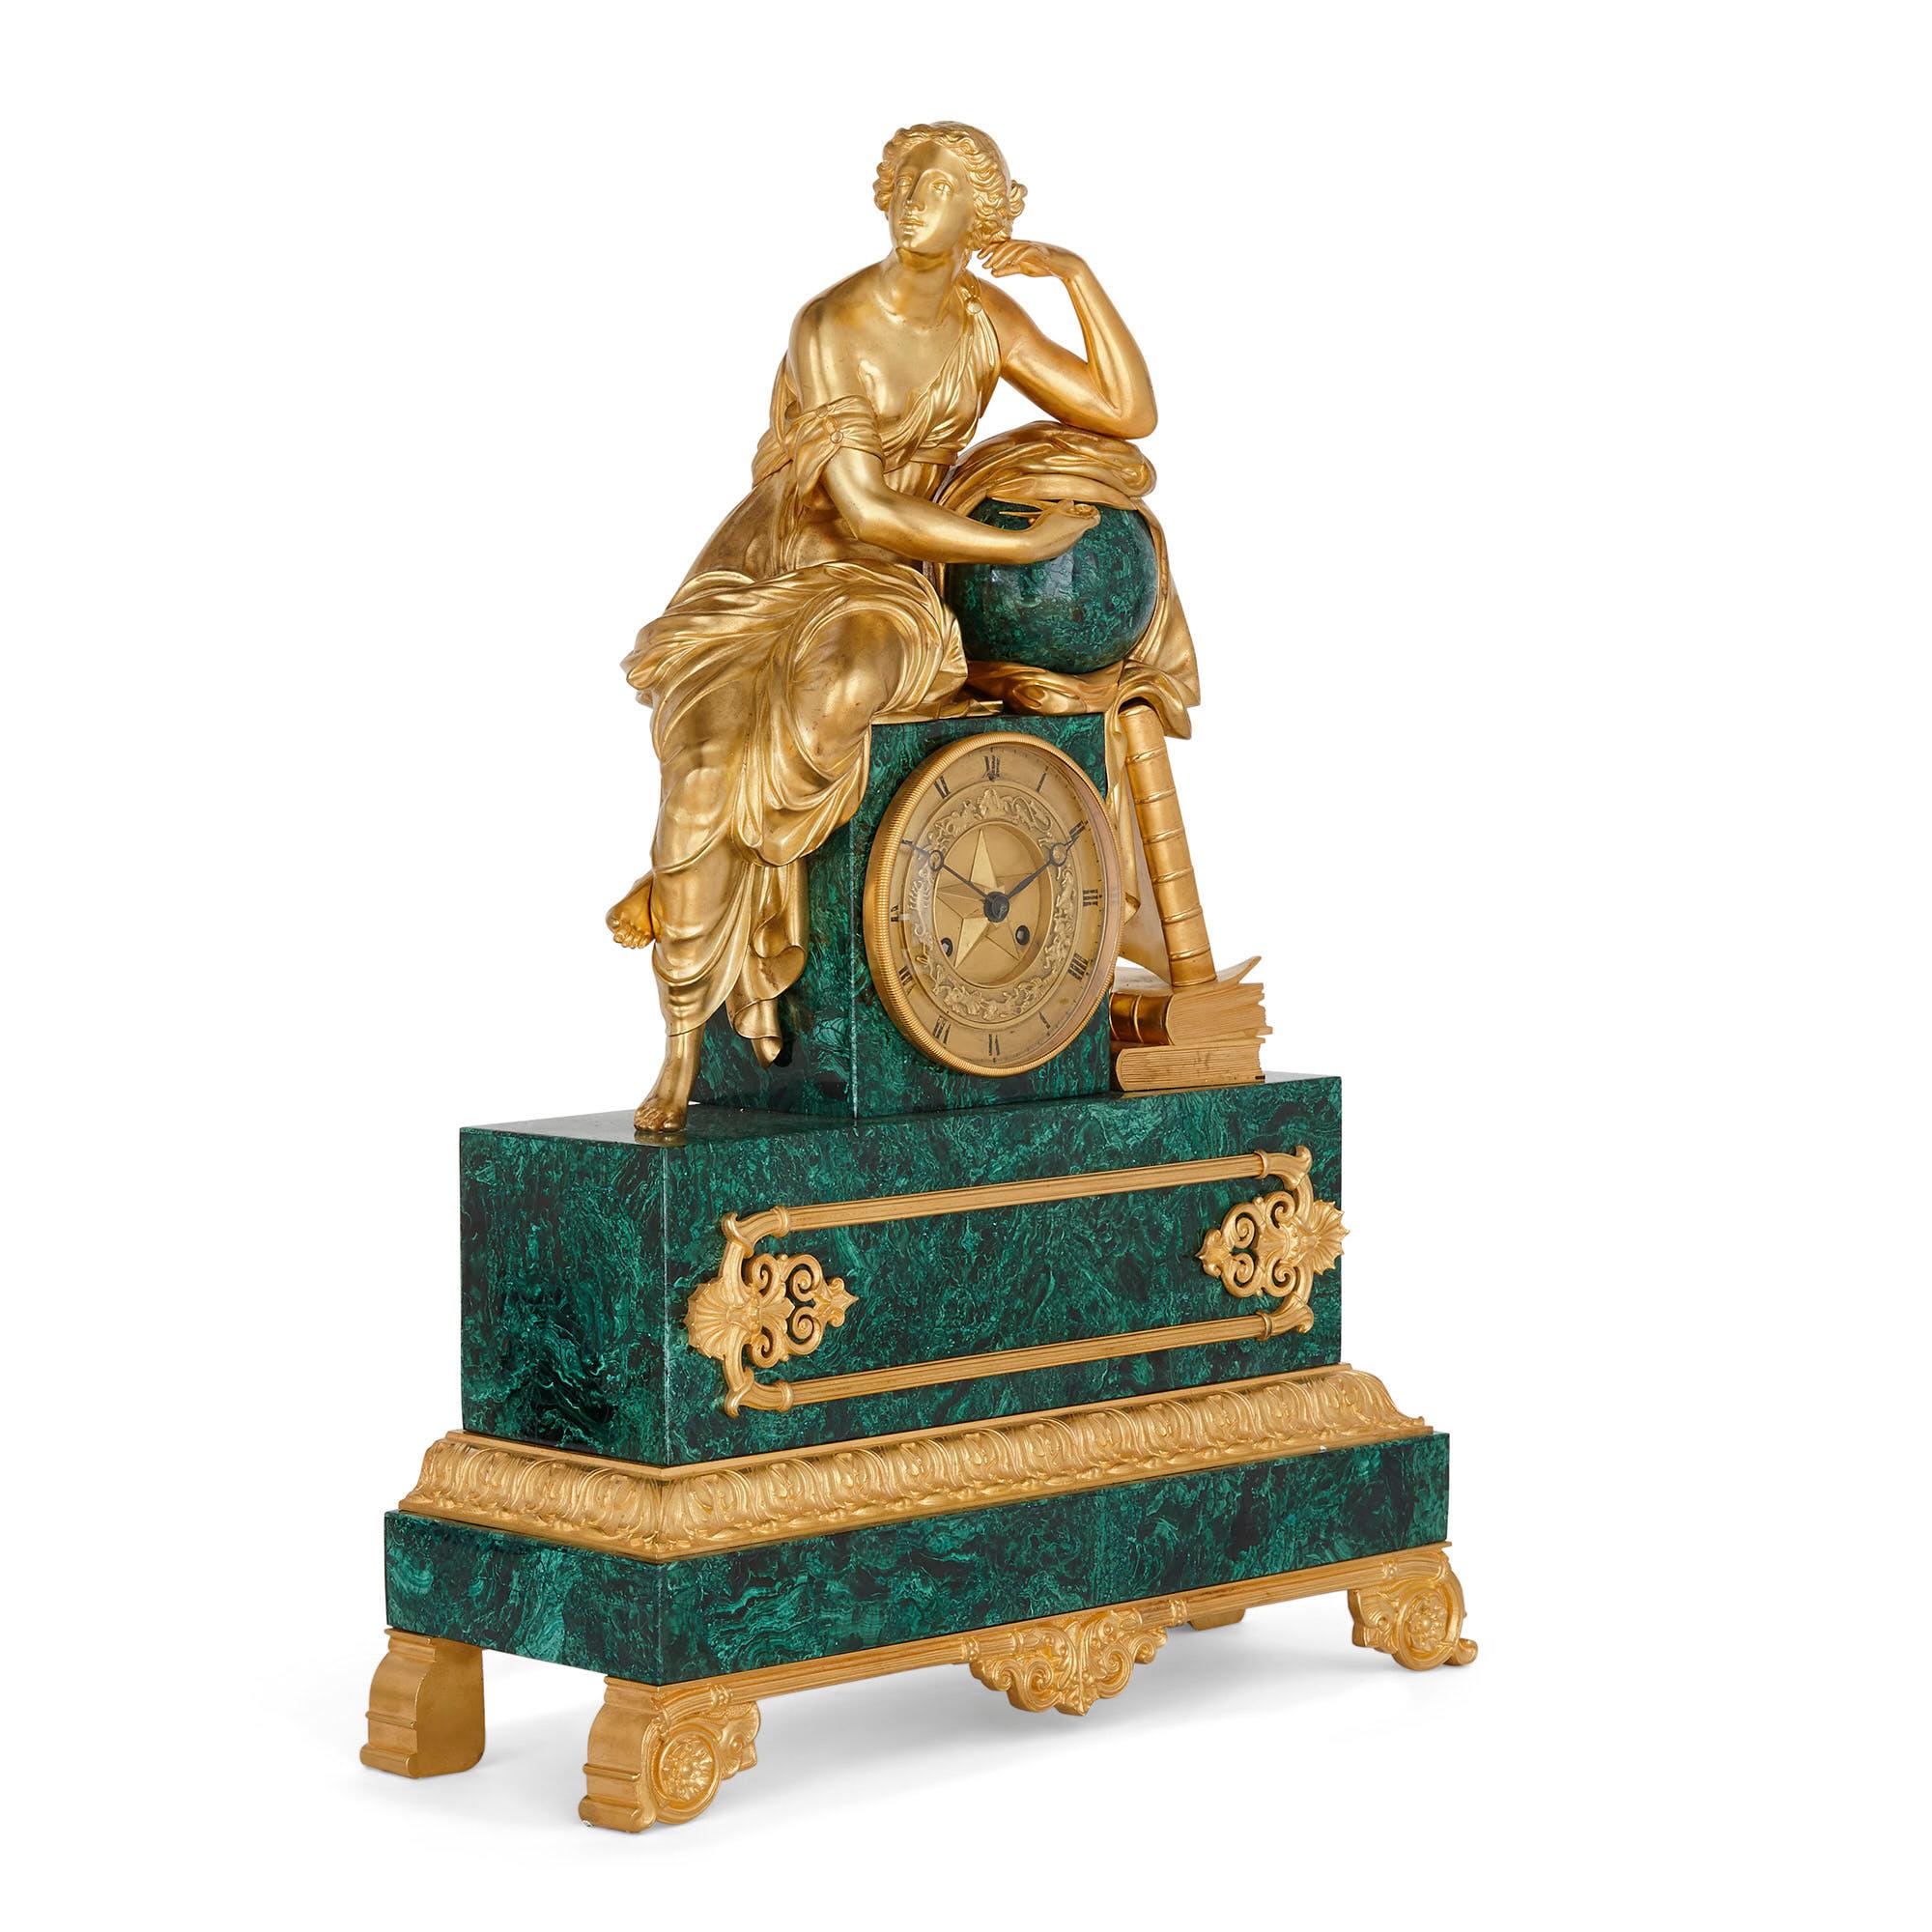 French Charles X malachite and gilt bronze figurative clock
French, circa 1830
Measures: Height 62cm, width 45cm, depth 16cm

This fine mantel clock is a superb example of the Charles X style. The clock, wrought from malachite and gilt bronze,